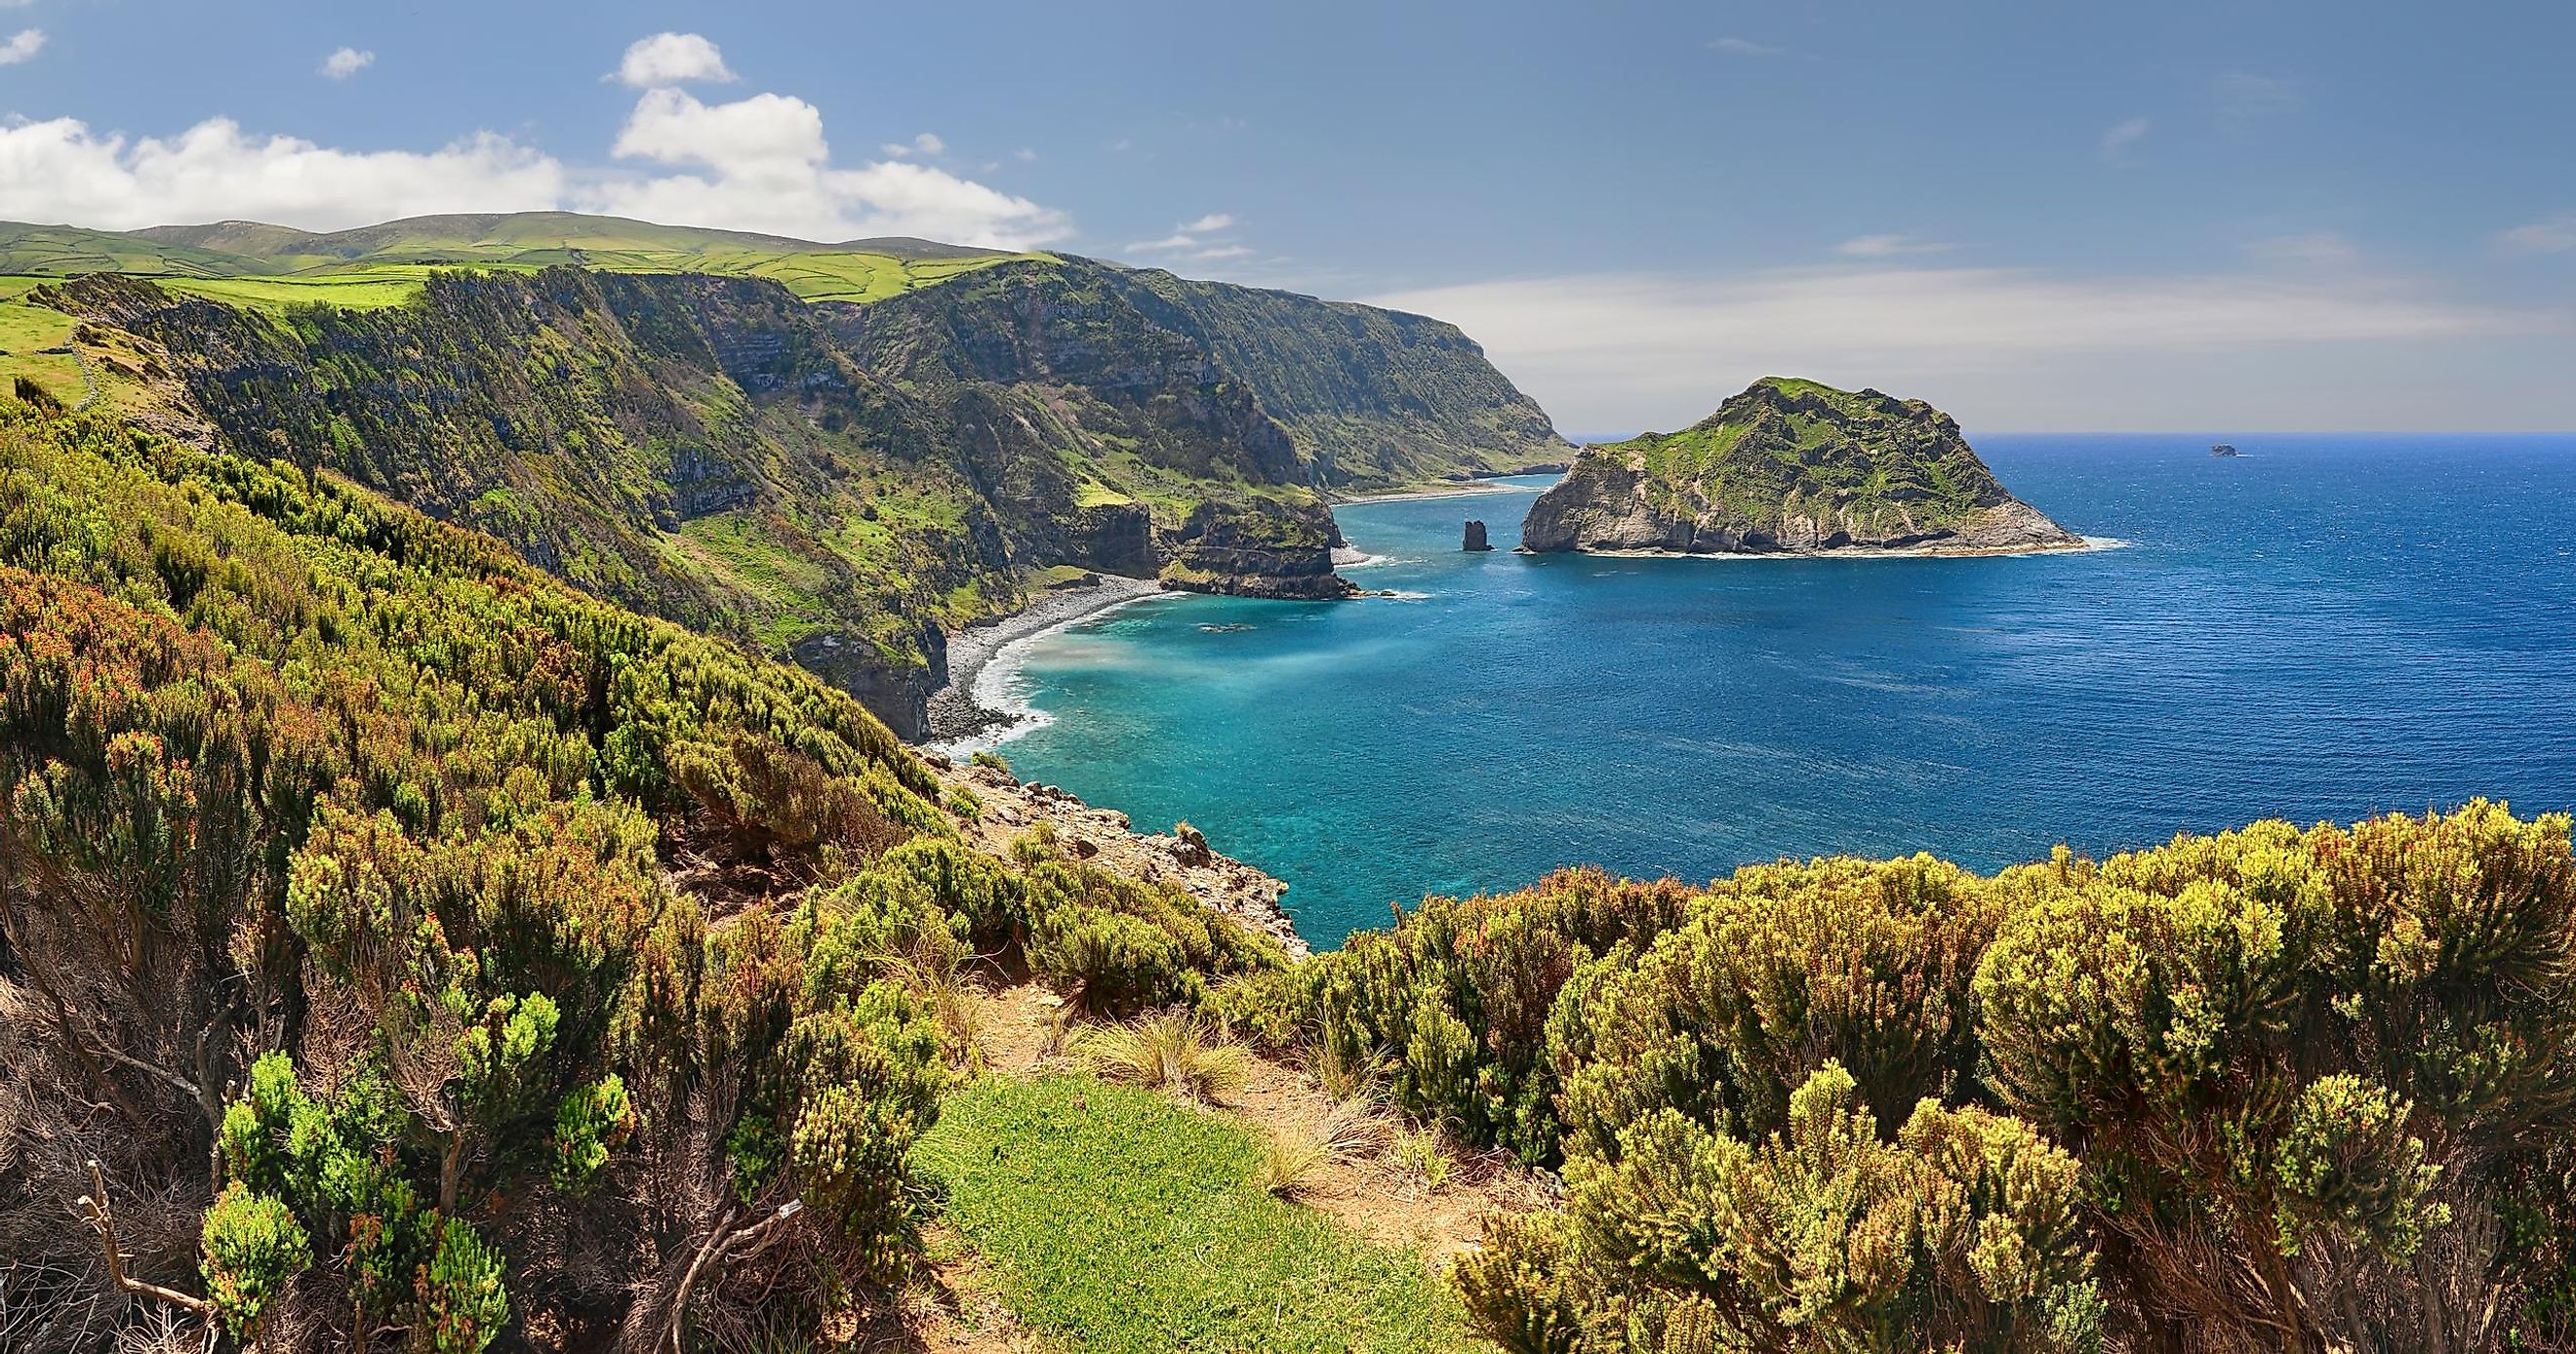 The Azores Islands.